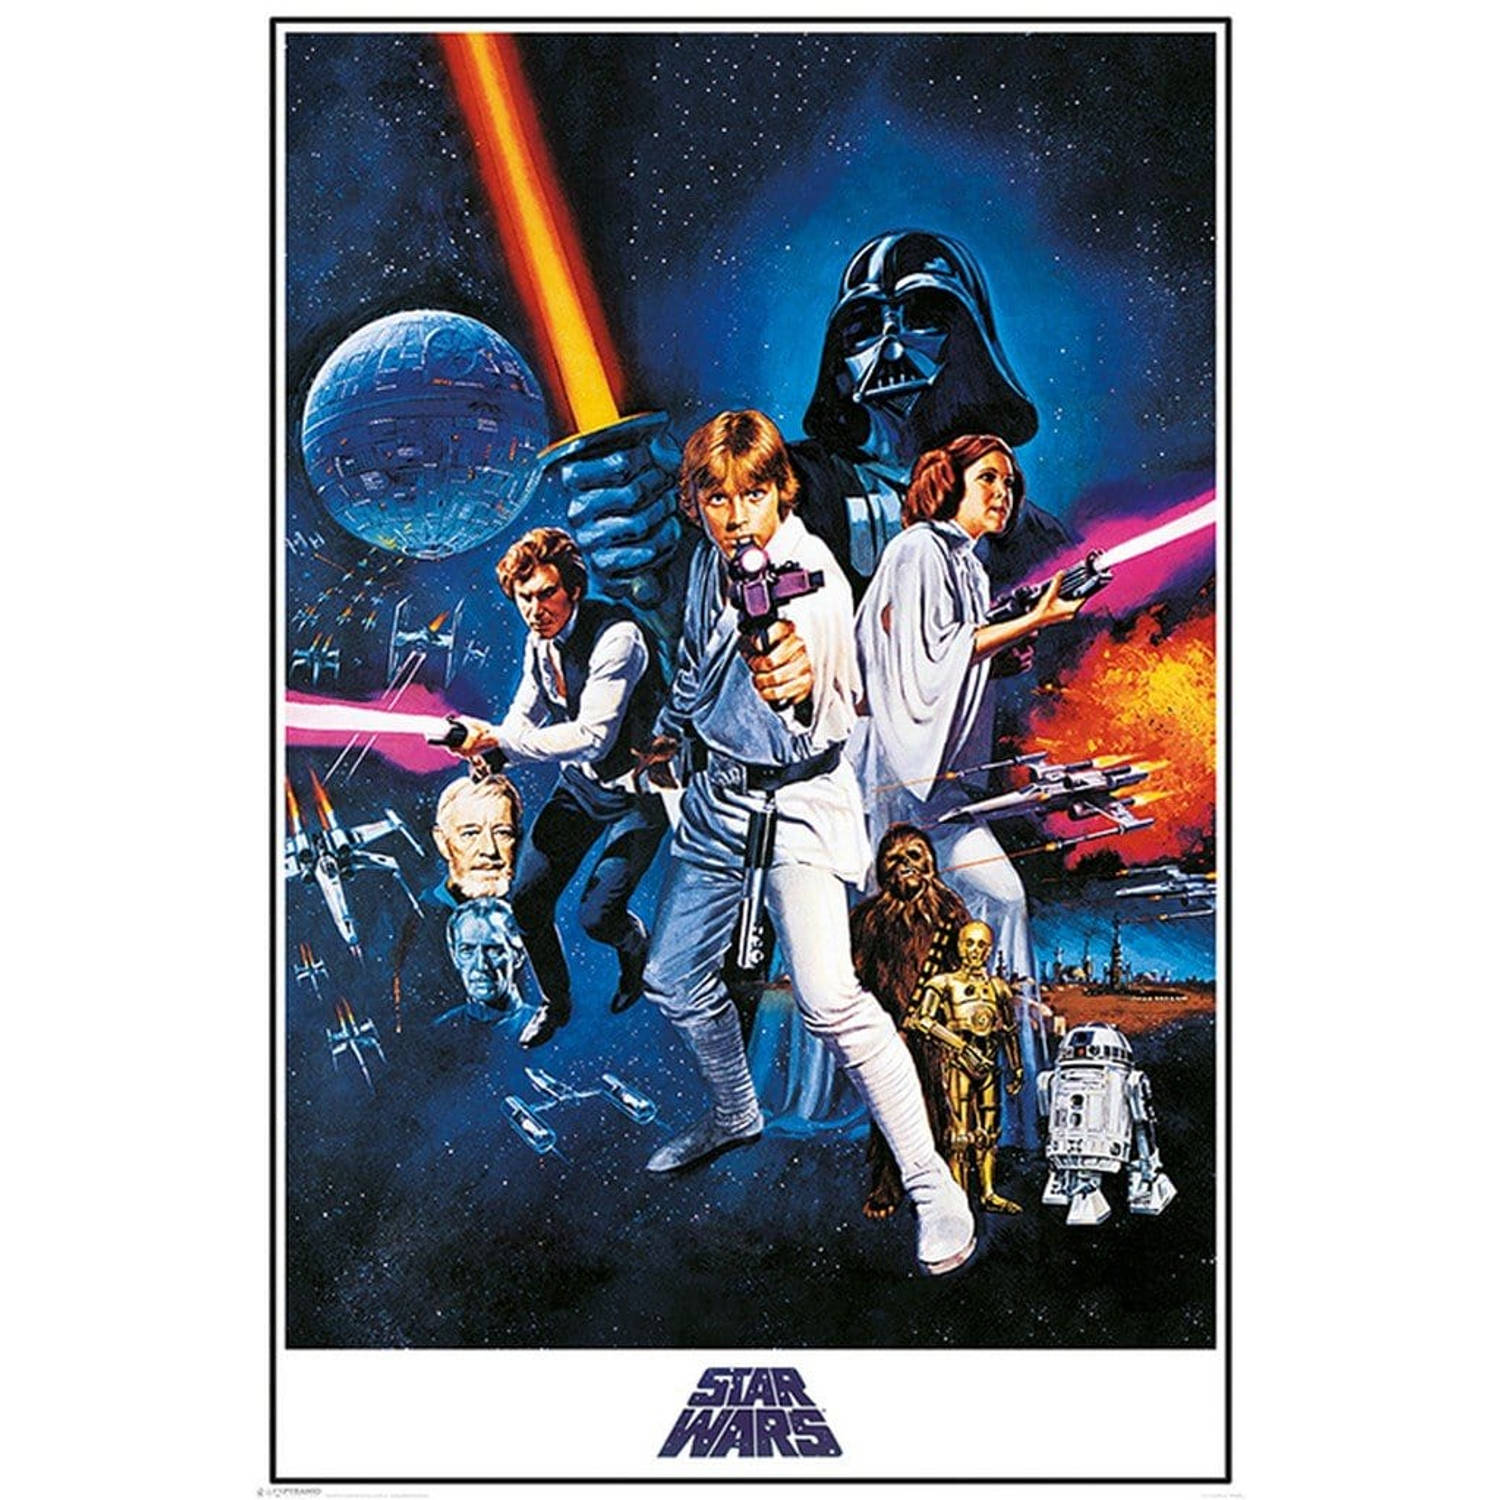 Star Wars A New Hope One Sheet 24 x 36 Inches Maxi Poster